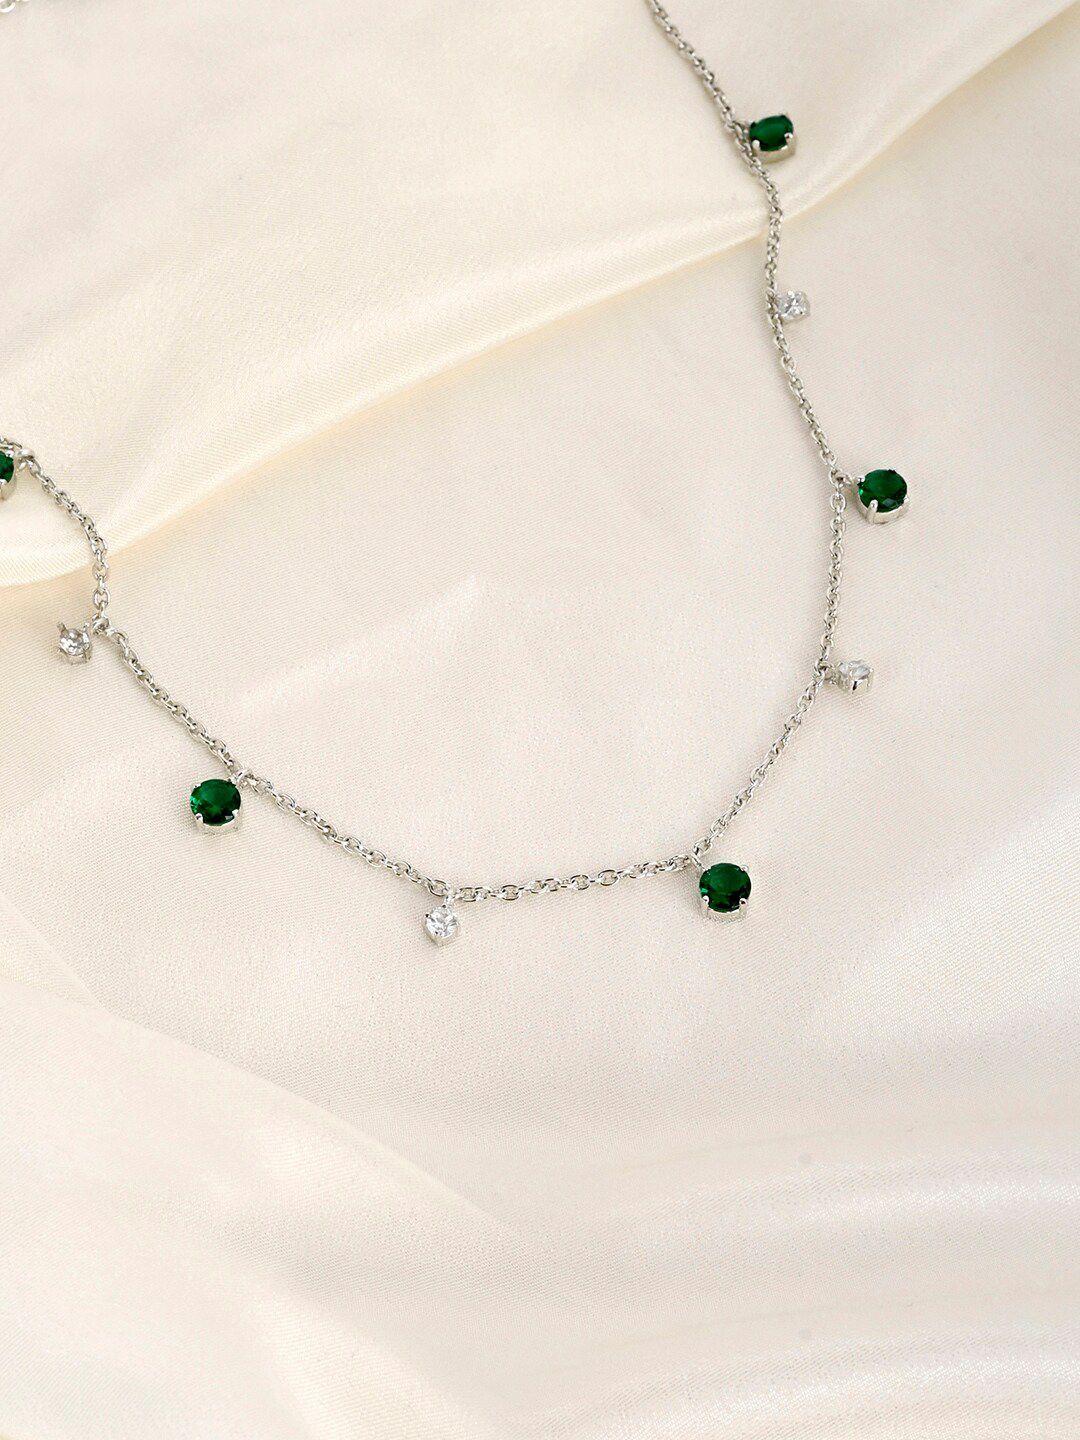 mikoto by fablestreet 925 sterling silver rhodium- plated green necklace